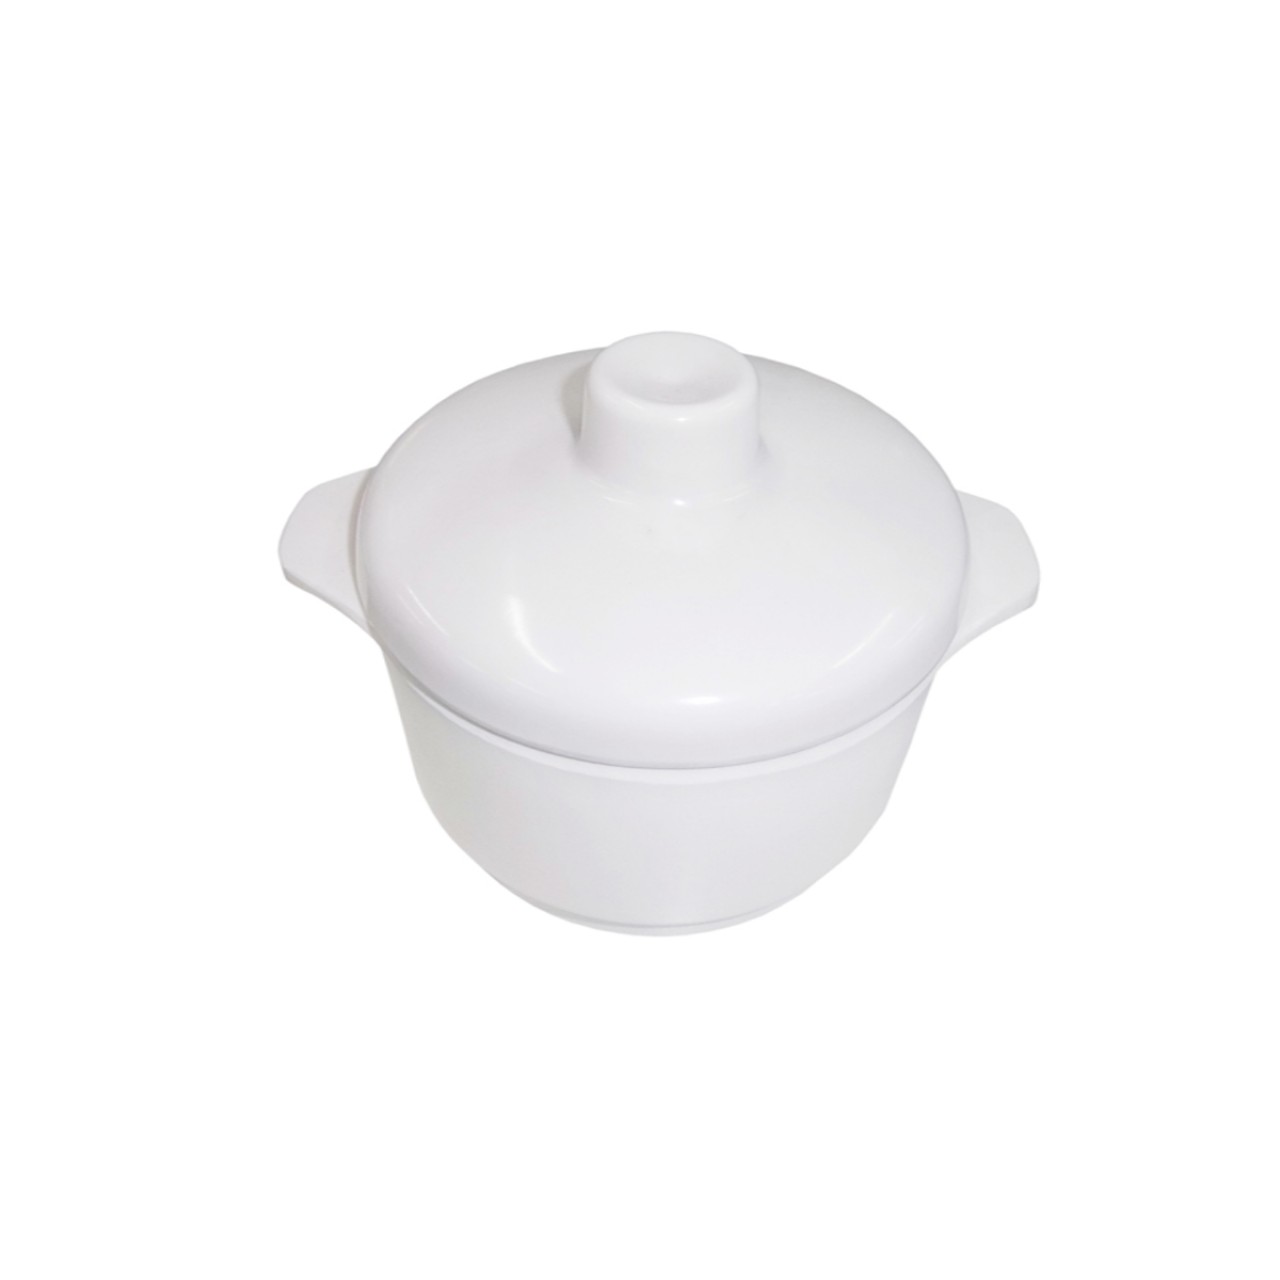 NIPPONWARE MELAMINE CASSEROLE WITH COVER HG4   